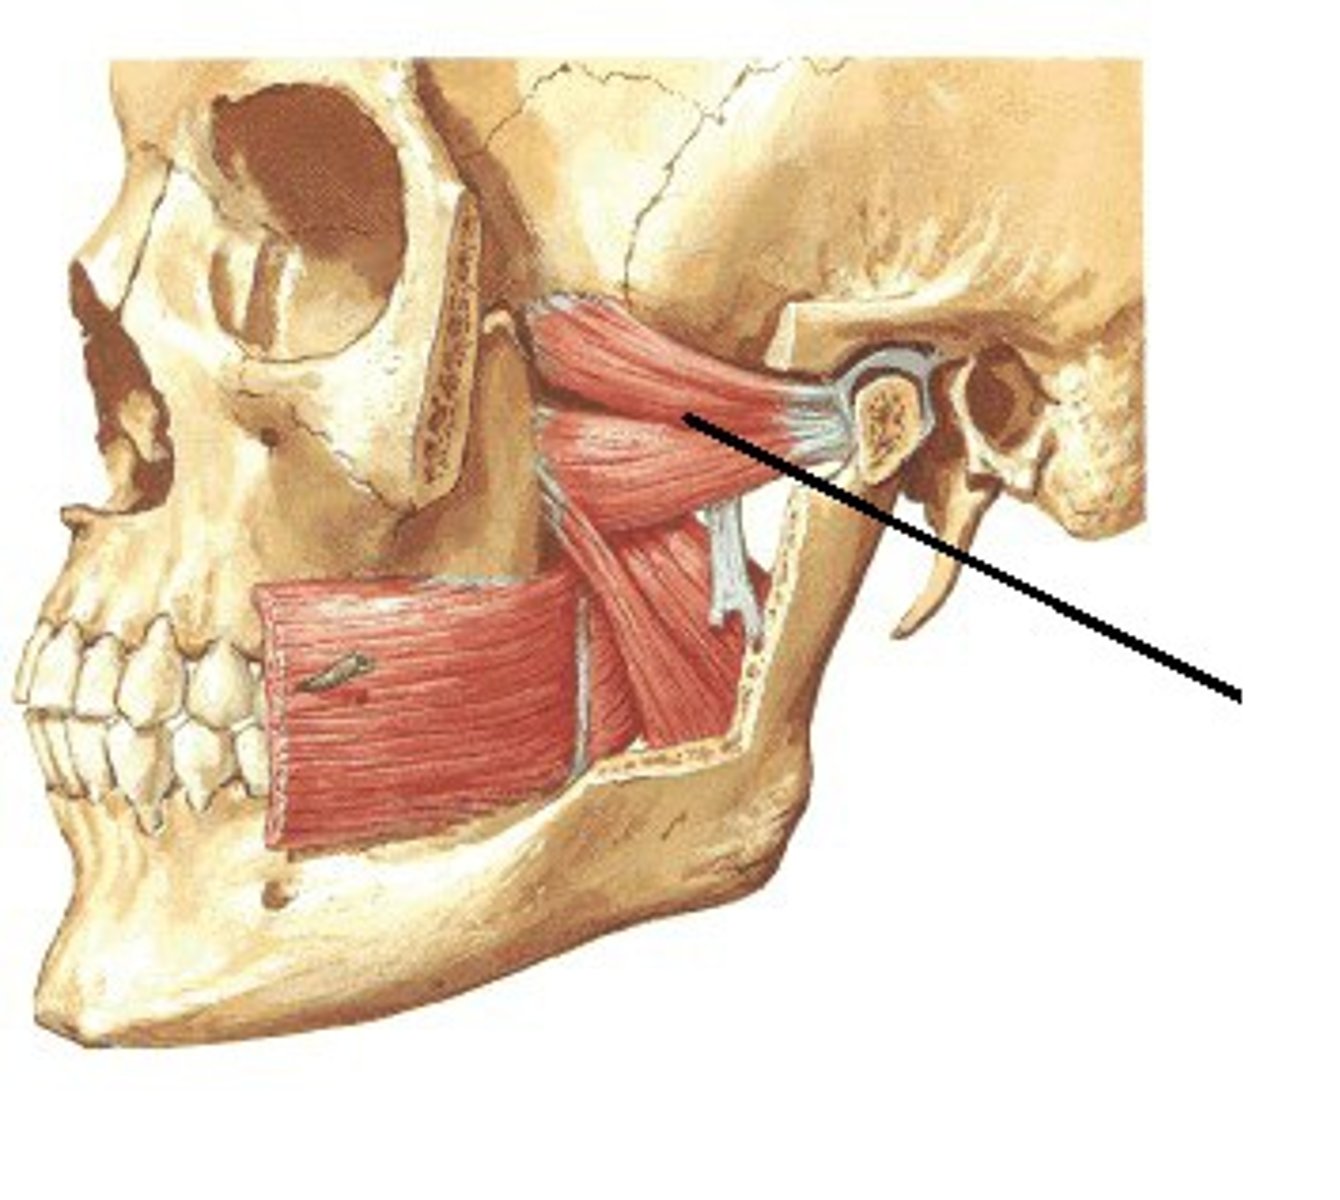 <p>- origin (superior head): infratemporal surface of grater wing of sphenoid<br>- origin (inferior head): lateral pterygoid plate<br>- insertion: pterygoid fovea, capsule of tmj<br>- action (acting together): protrude mandible<br>- action (acting alone): protrudes side of jaw <br>- action (acting alternatively): produces grinding motion</p>